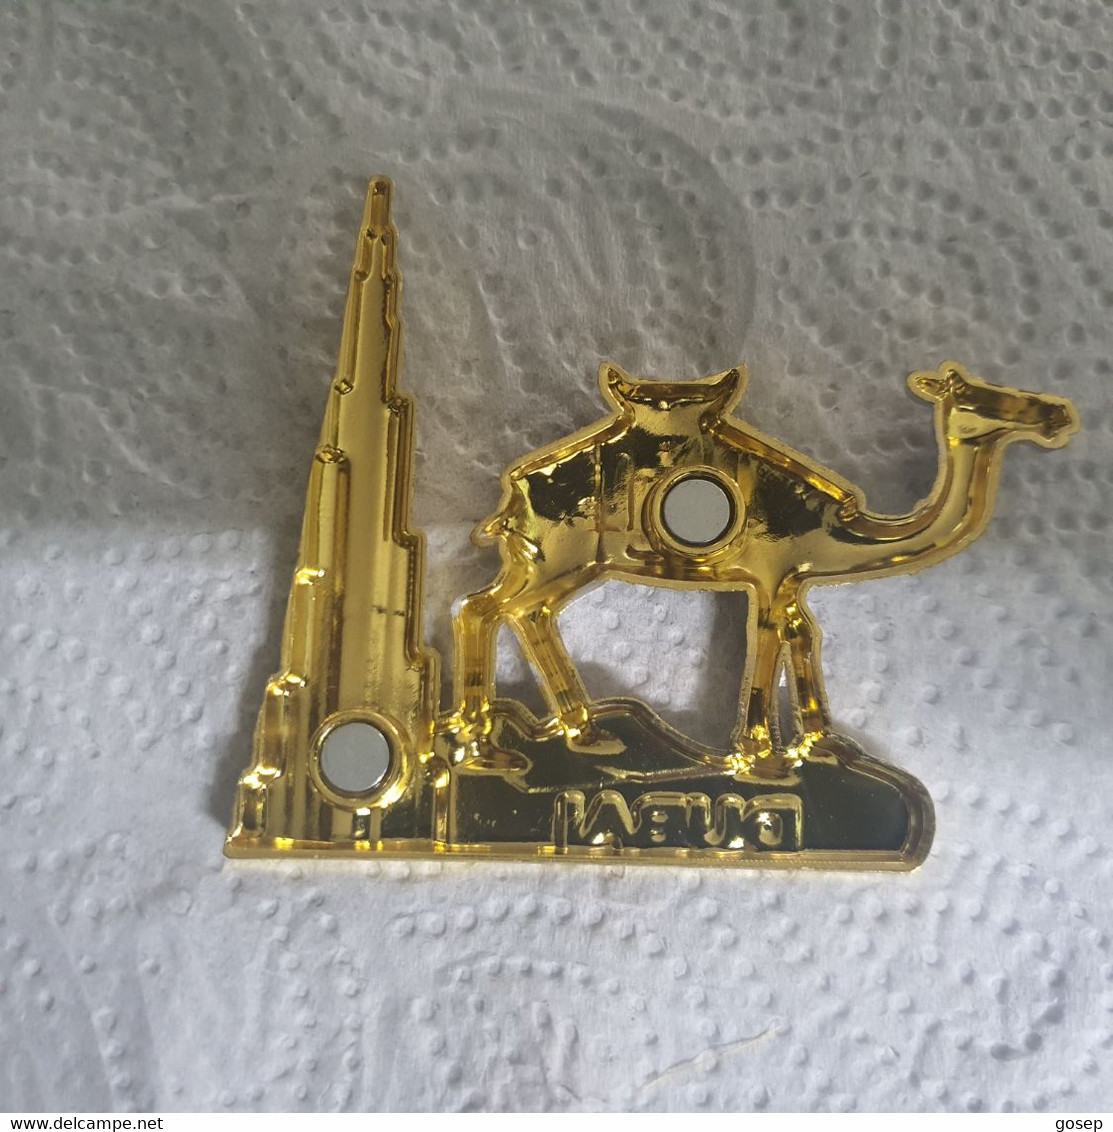 United Arab Emiratas-DABAI-Tourist Sites In Dubai With A Magnetic Landscape With Strong Metal And Gold Plating(11)-new P - Animals & Fauna